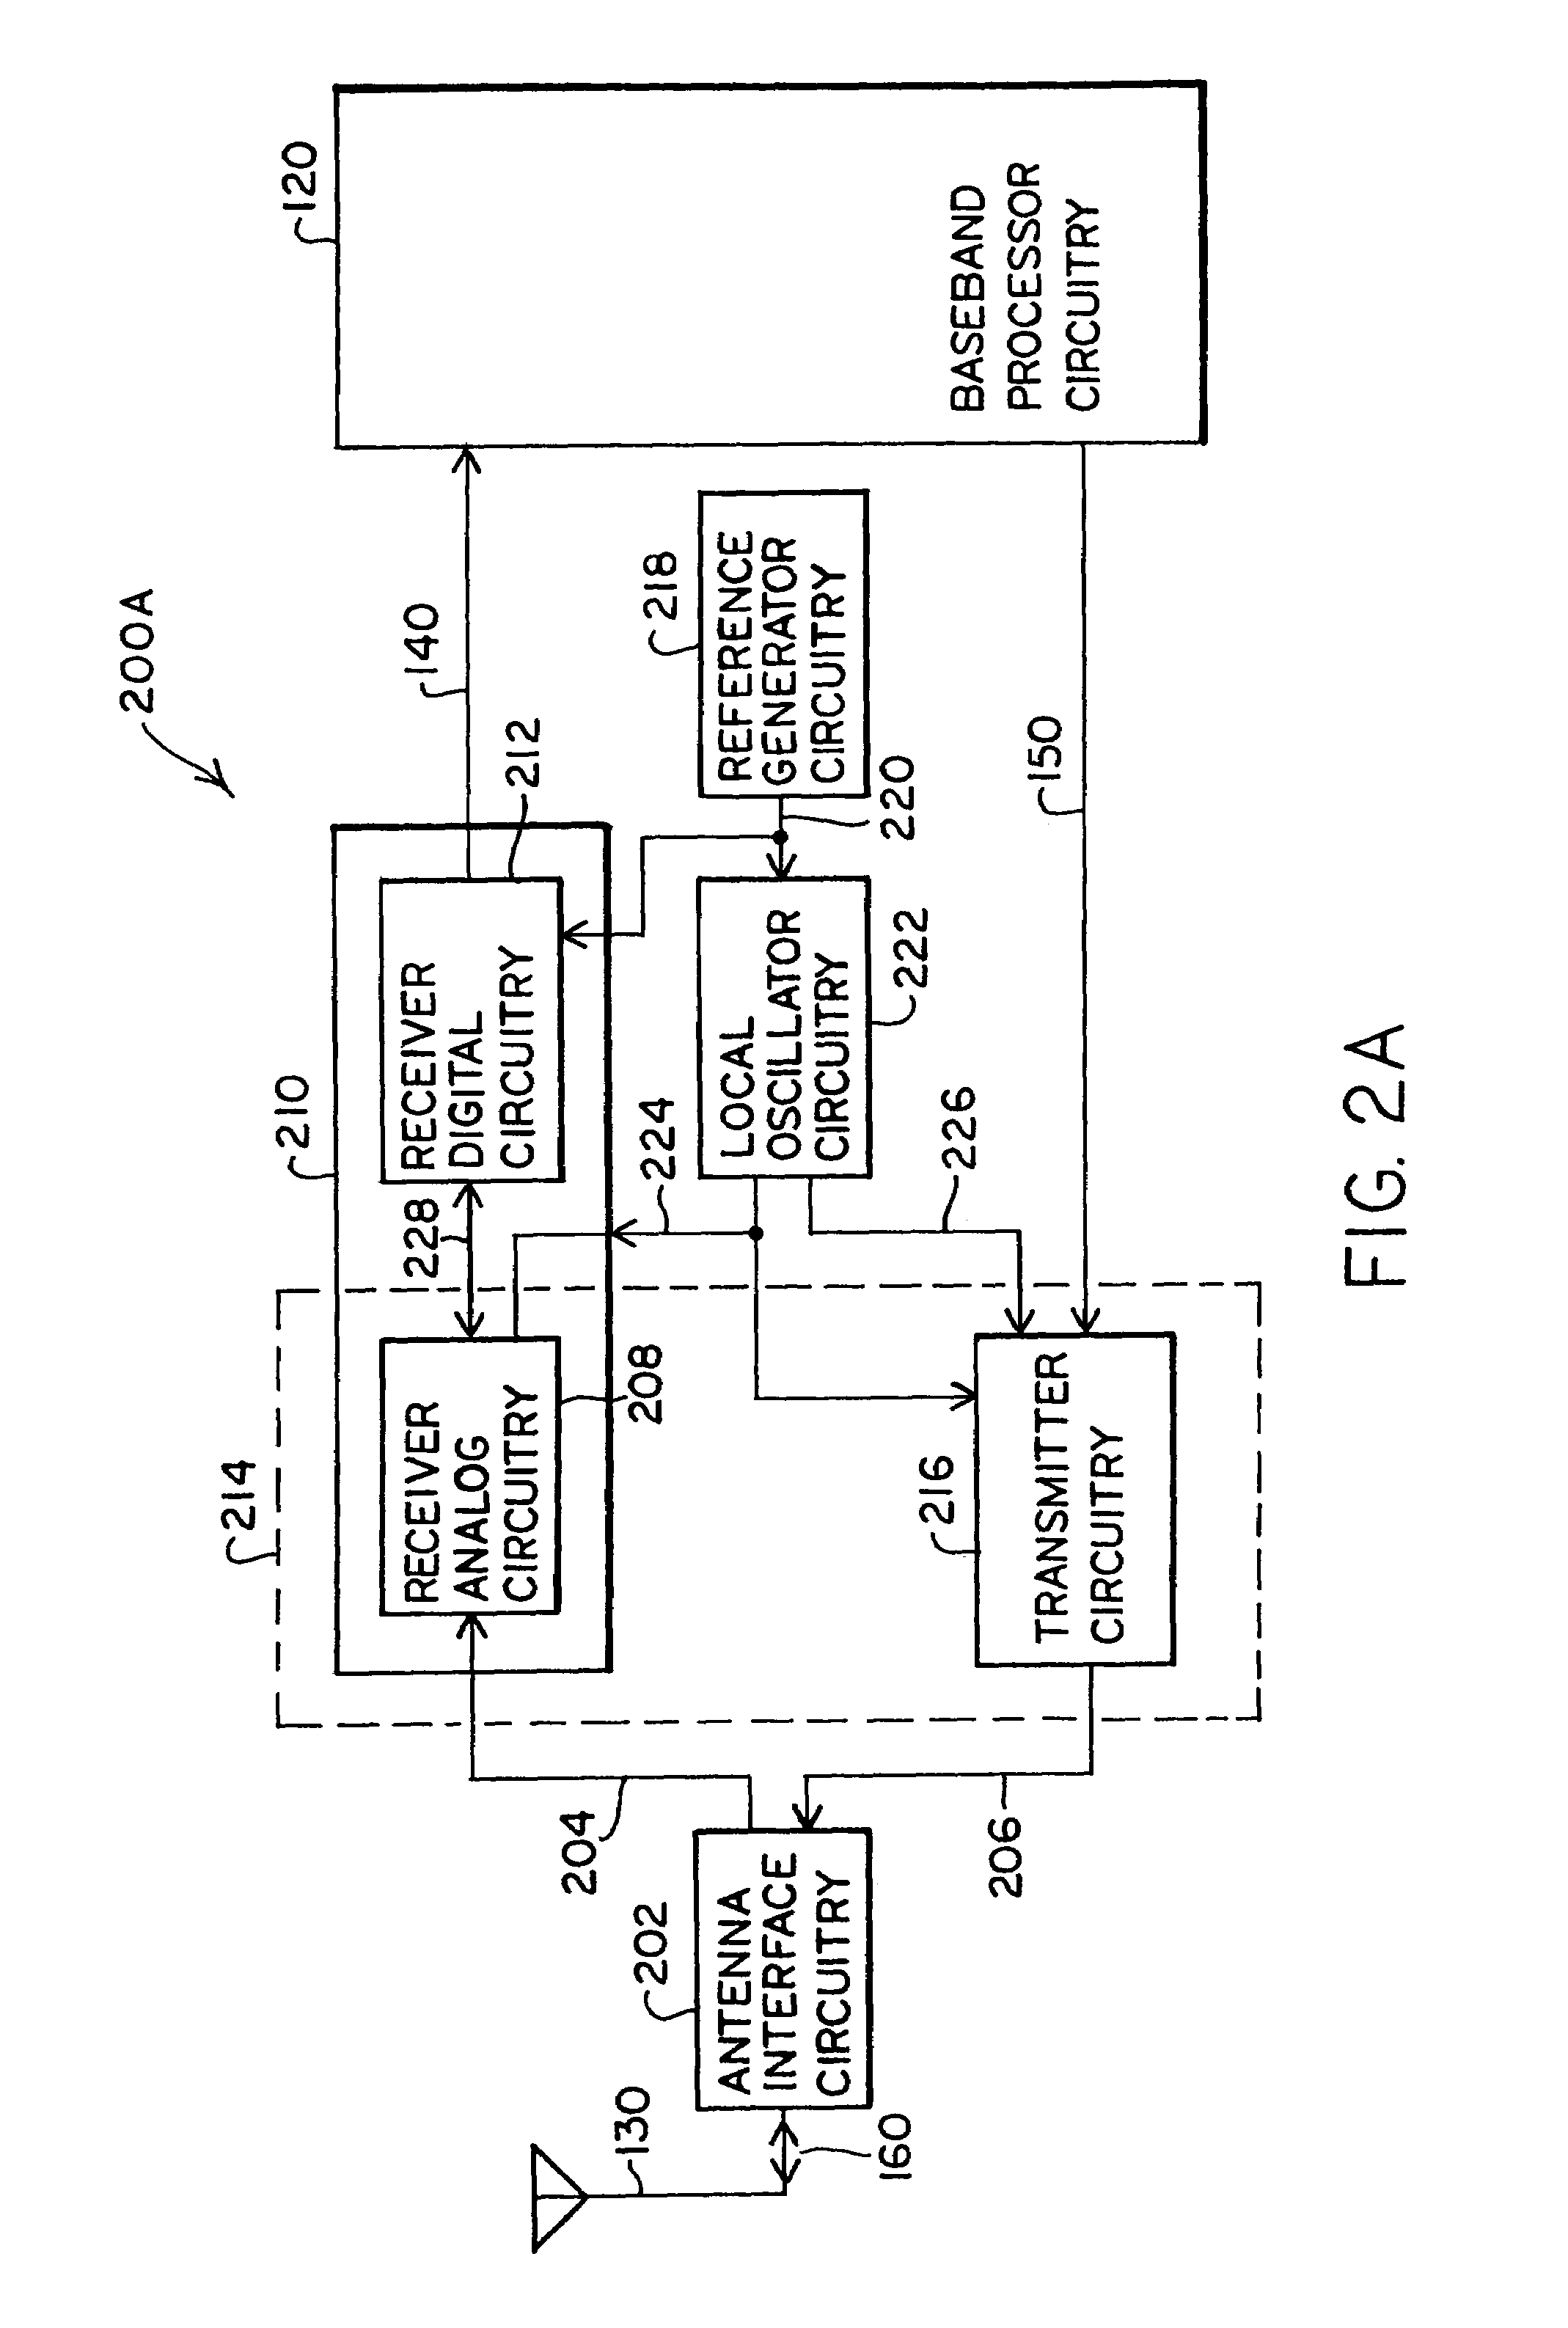 Apparatus and methods for output buffer circuitry with constant output power in radio-frequency circuitry